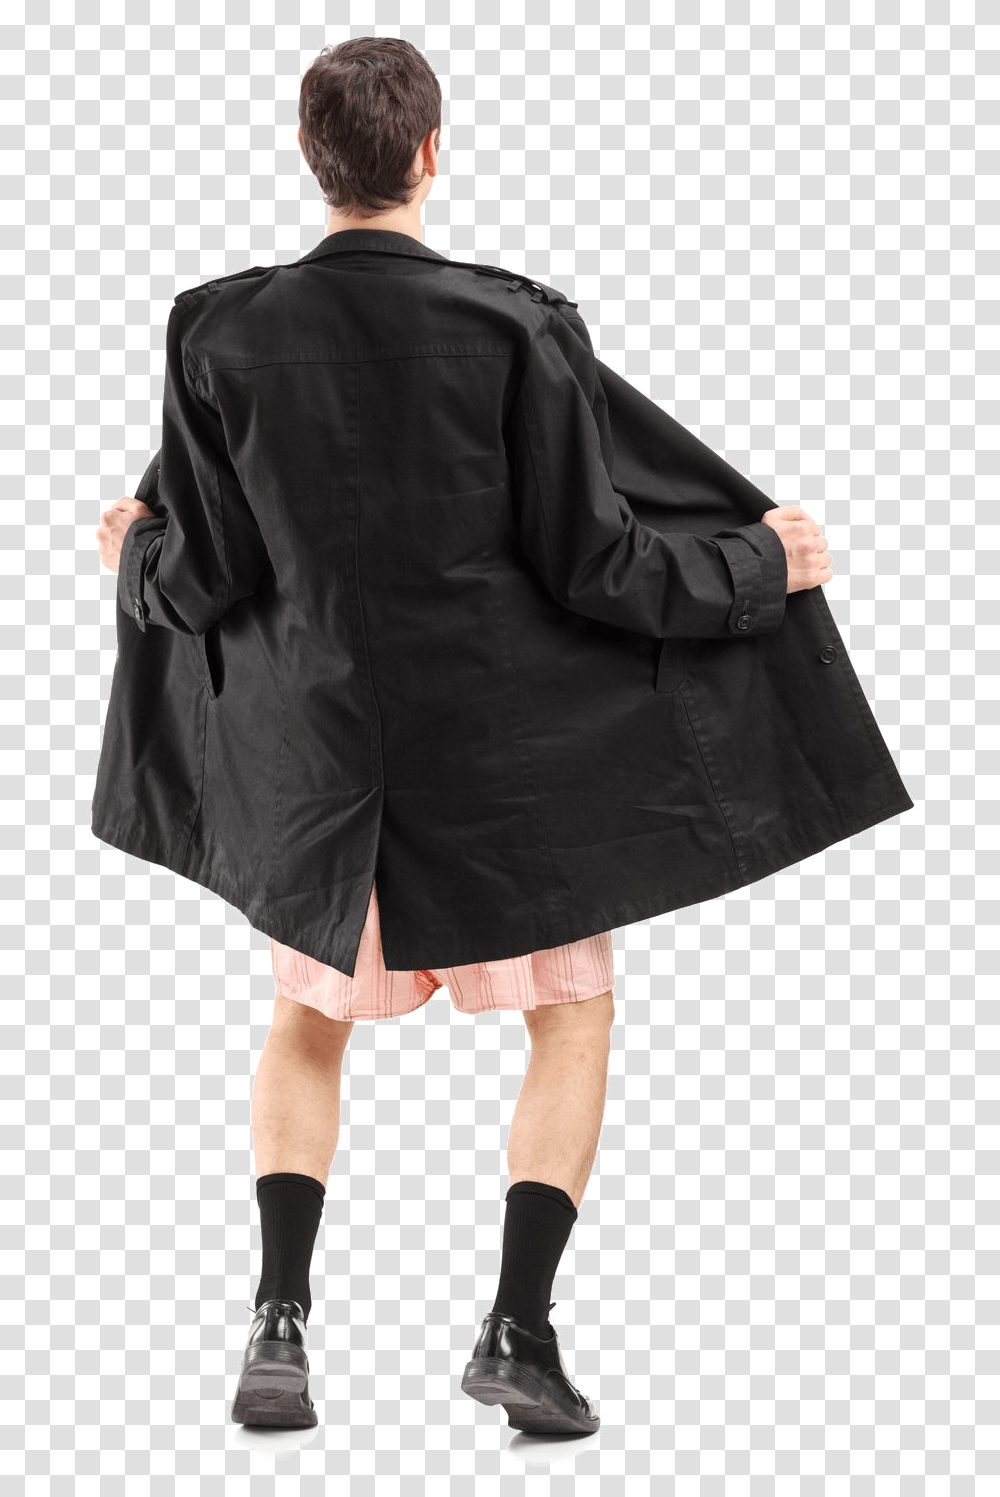 Flasher Cutouts Flasher Stock, Apparel, Coat, Person Transparent Png